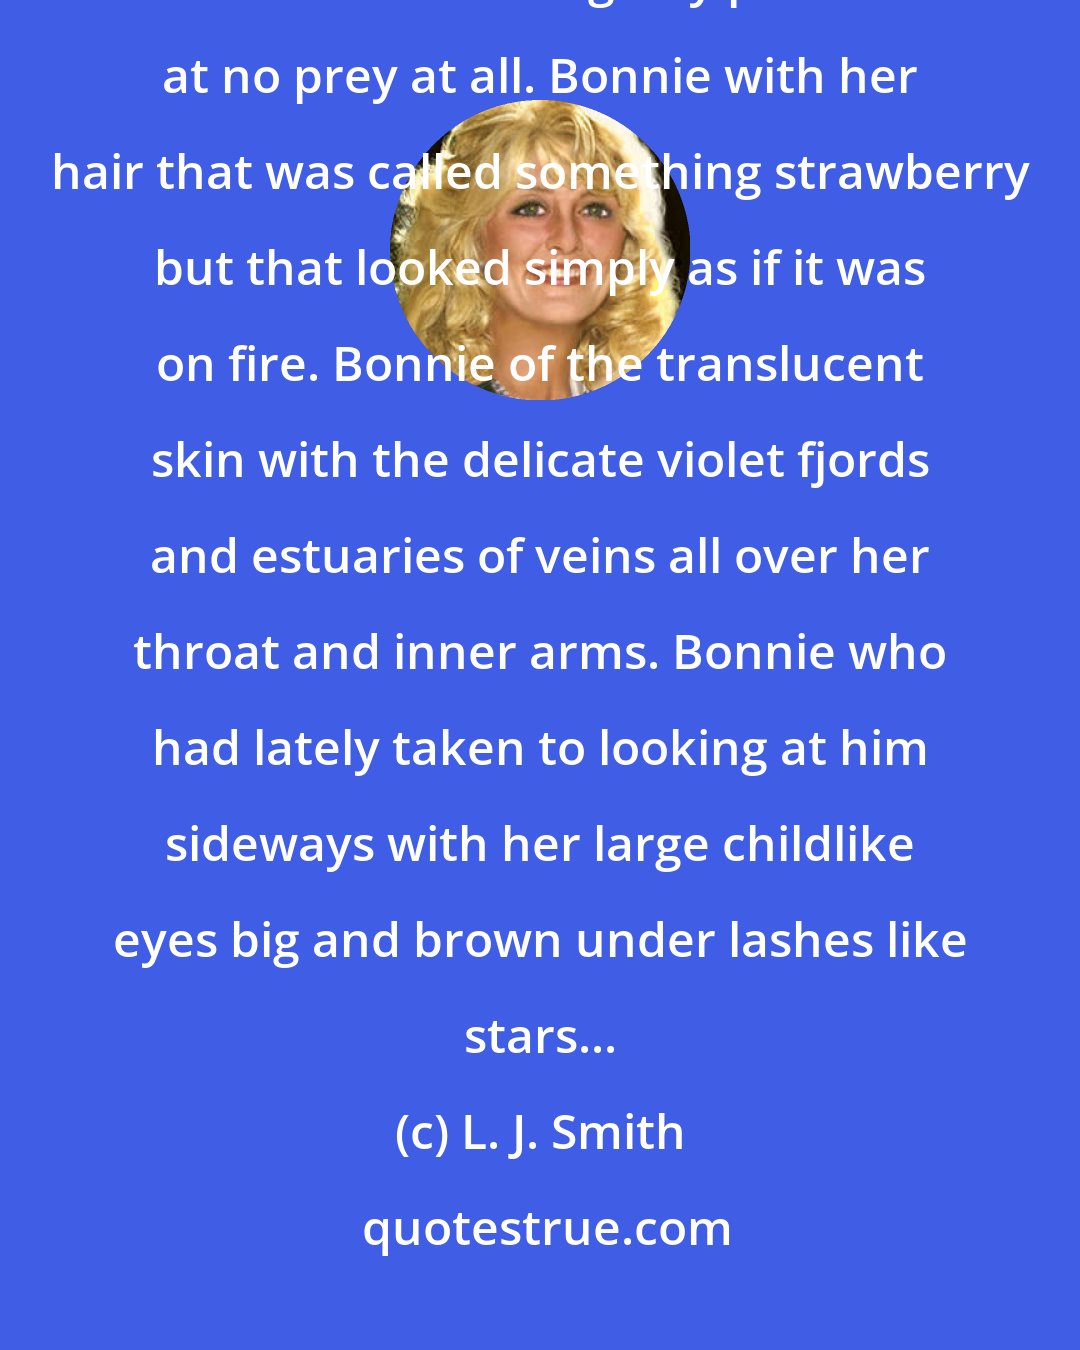 L. J. Smith: Bonnie who had never hurt a - a harmless thing for malice. Bonnie who was like a kitten making airy pounces at no prey at all. Bonnie with her hair that was called something strawberry but that looked simply as if it was on fire. Bonnie of the translucent skin with the delicate violet fjords and estuaries of veins all over her throat and inner arms. Bonnie who had lately taken to looking at him sideways with her large childlike eyes big and brown under lashes like stars...